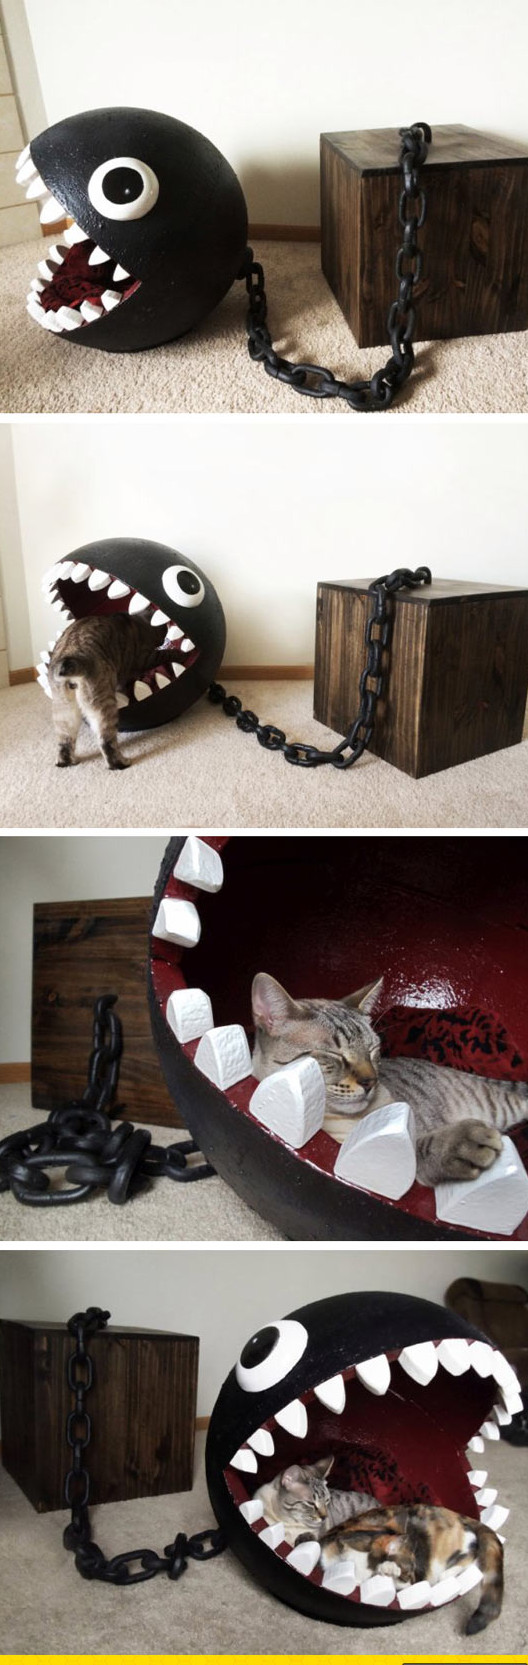 cool-cat-bed-mario-chomp-video-game